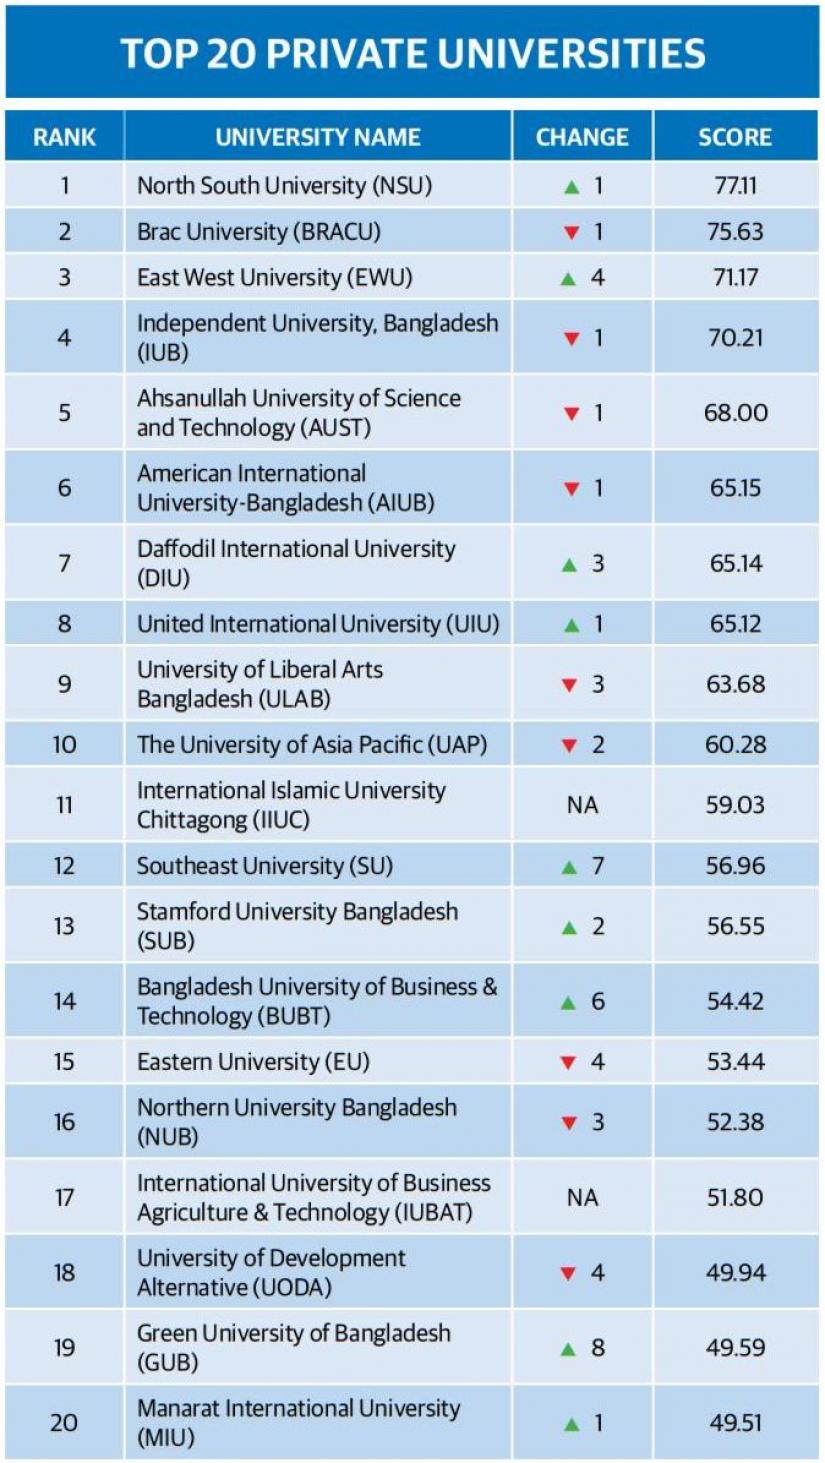 The top 20 private universities in Bangladesh